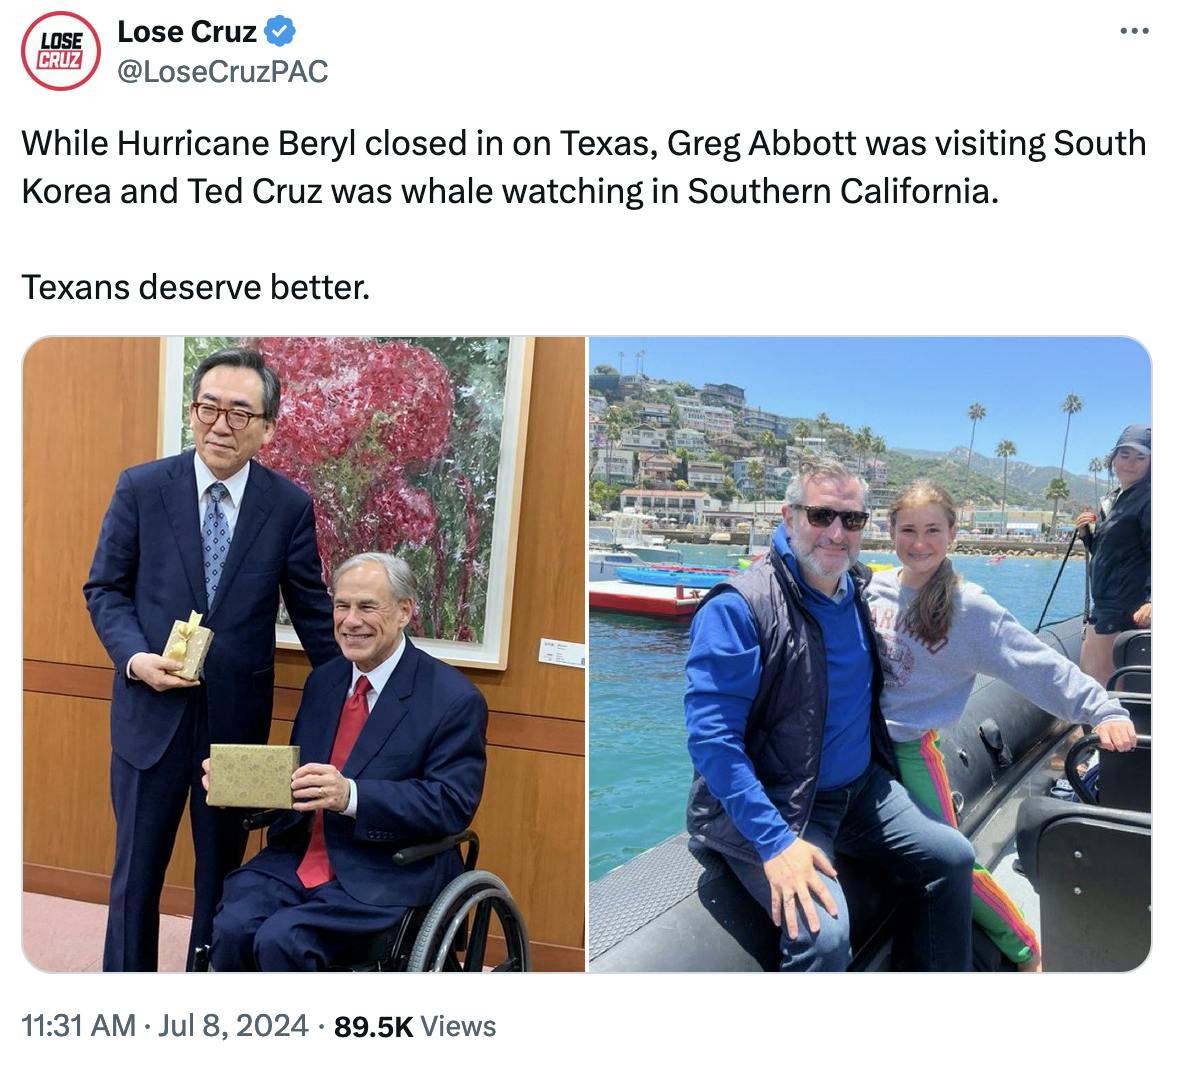 Twitter screenshot Lose Cruz @LoseCruzPAC: While Hurricane Beryl closed in on Texas, Greg Abbott was visiting South Korea and Ted Cruz was whale watching in Southern California. Texans deserve better.